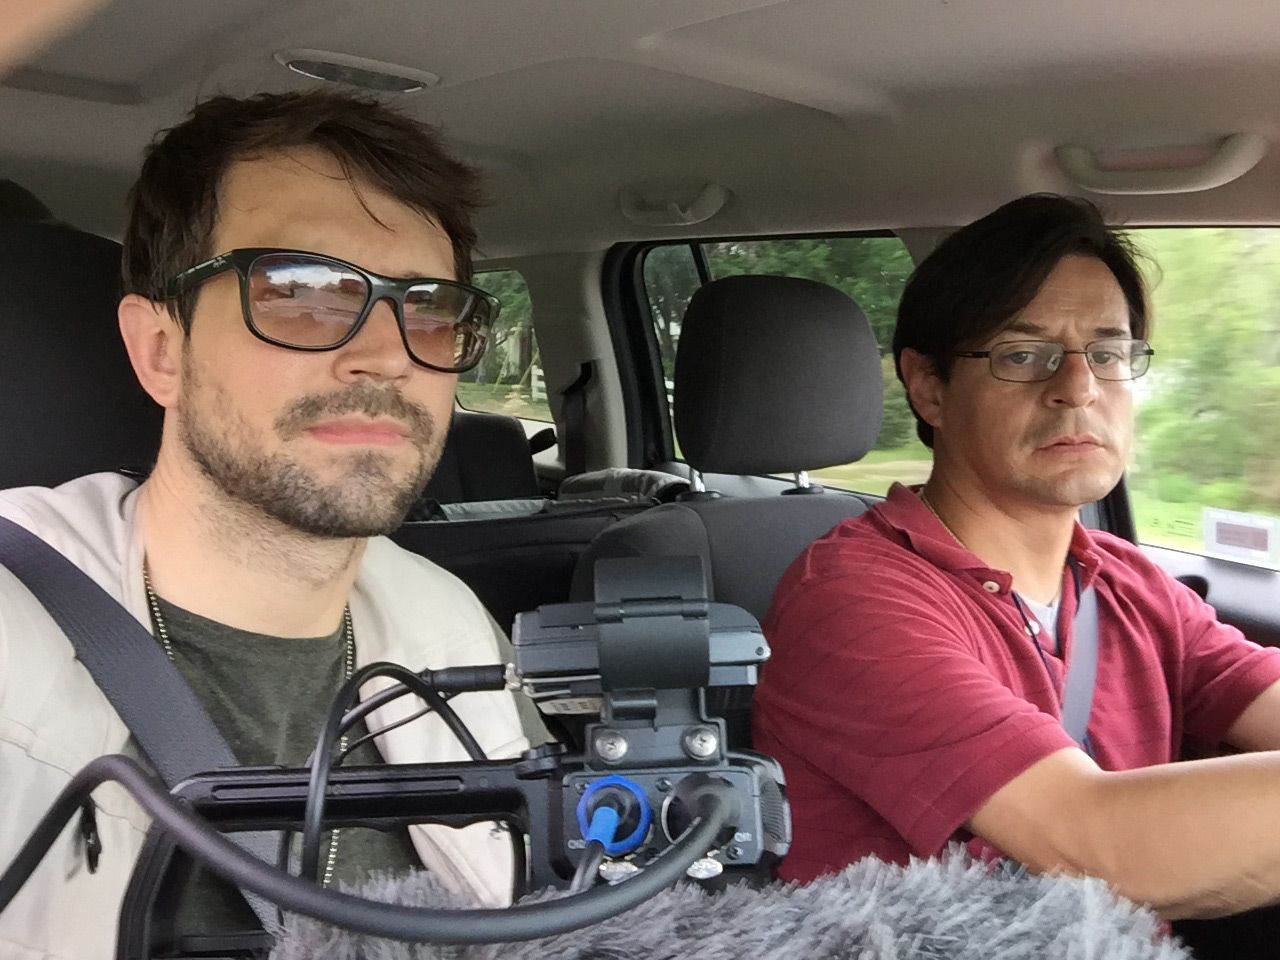 Todd Wiseman and Julián Aguilar driving on Oklahoma Avenue in Brownsville, August 2017. Image by Todd WIseman. United States, 2017.